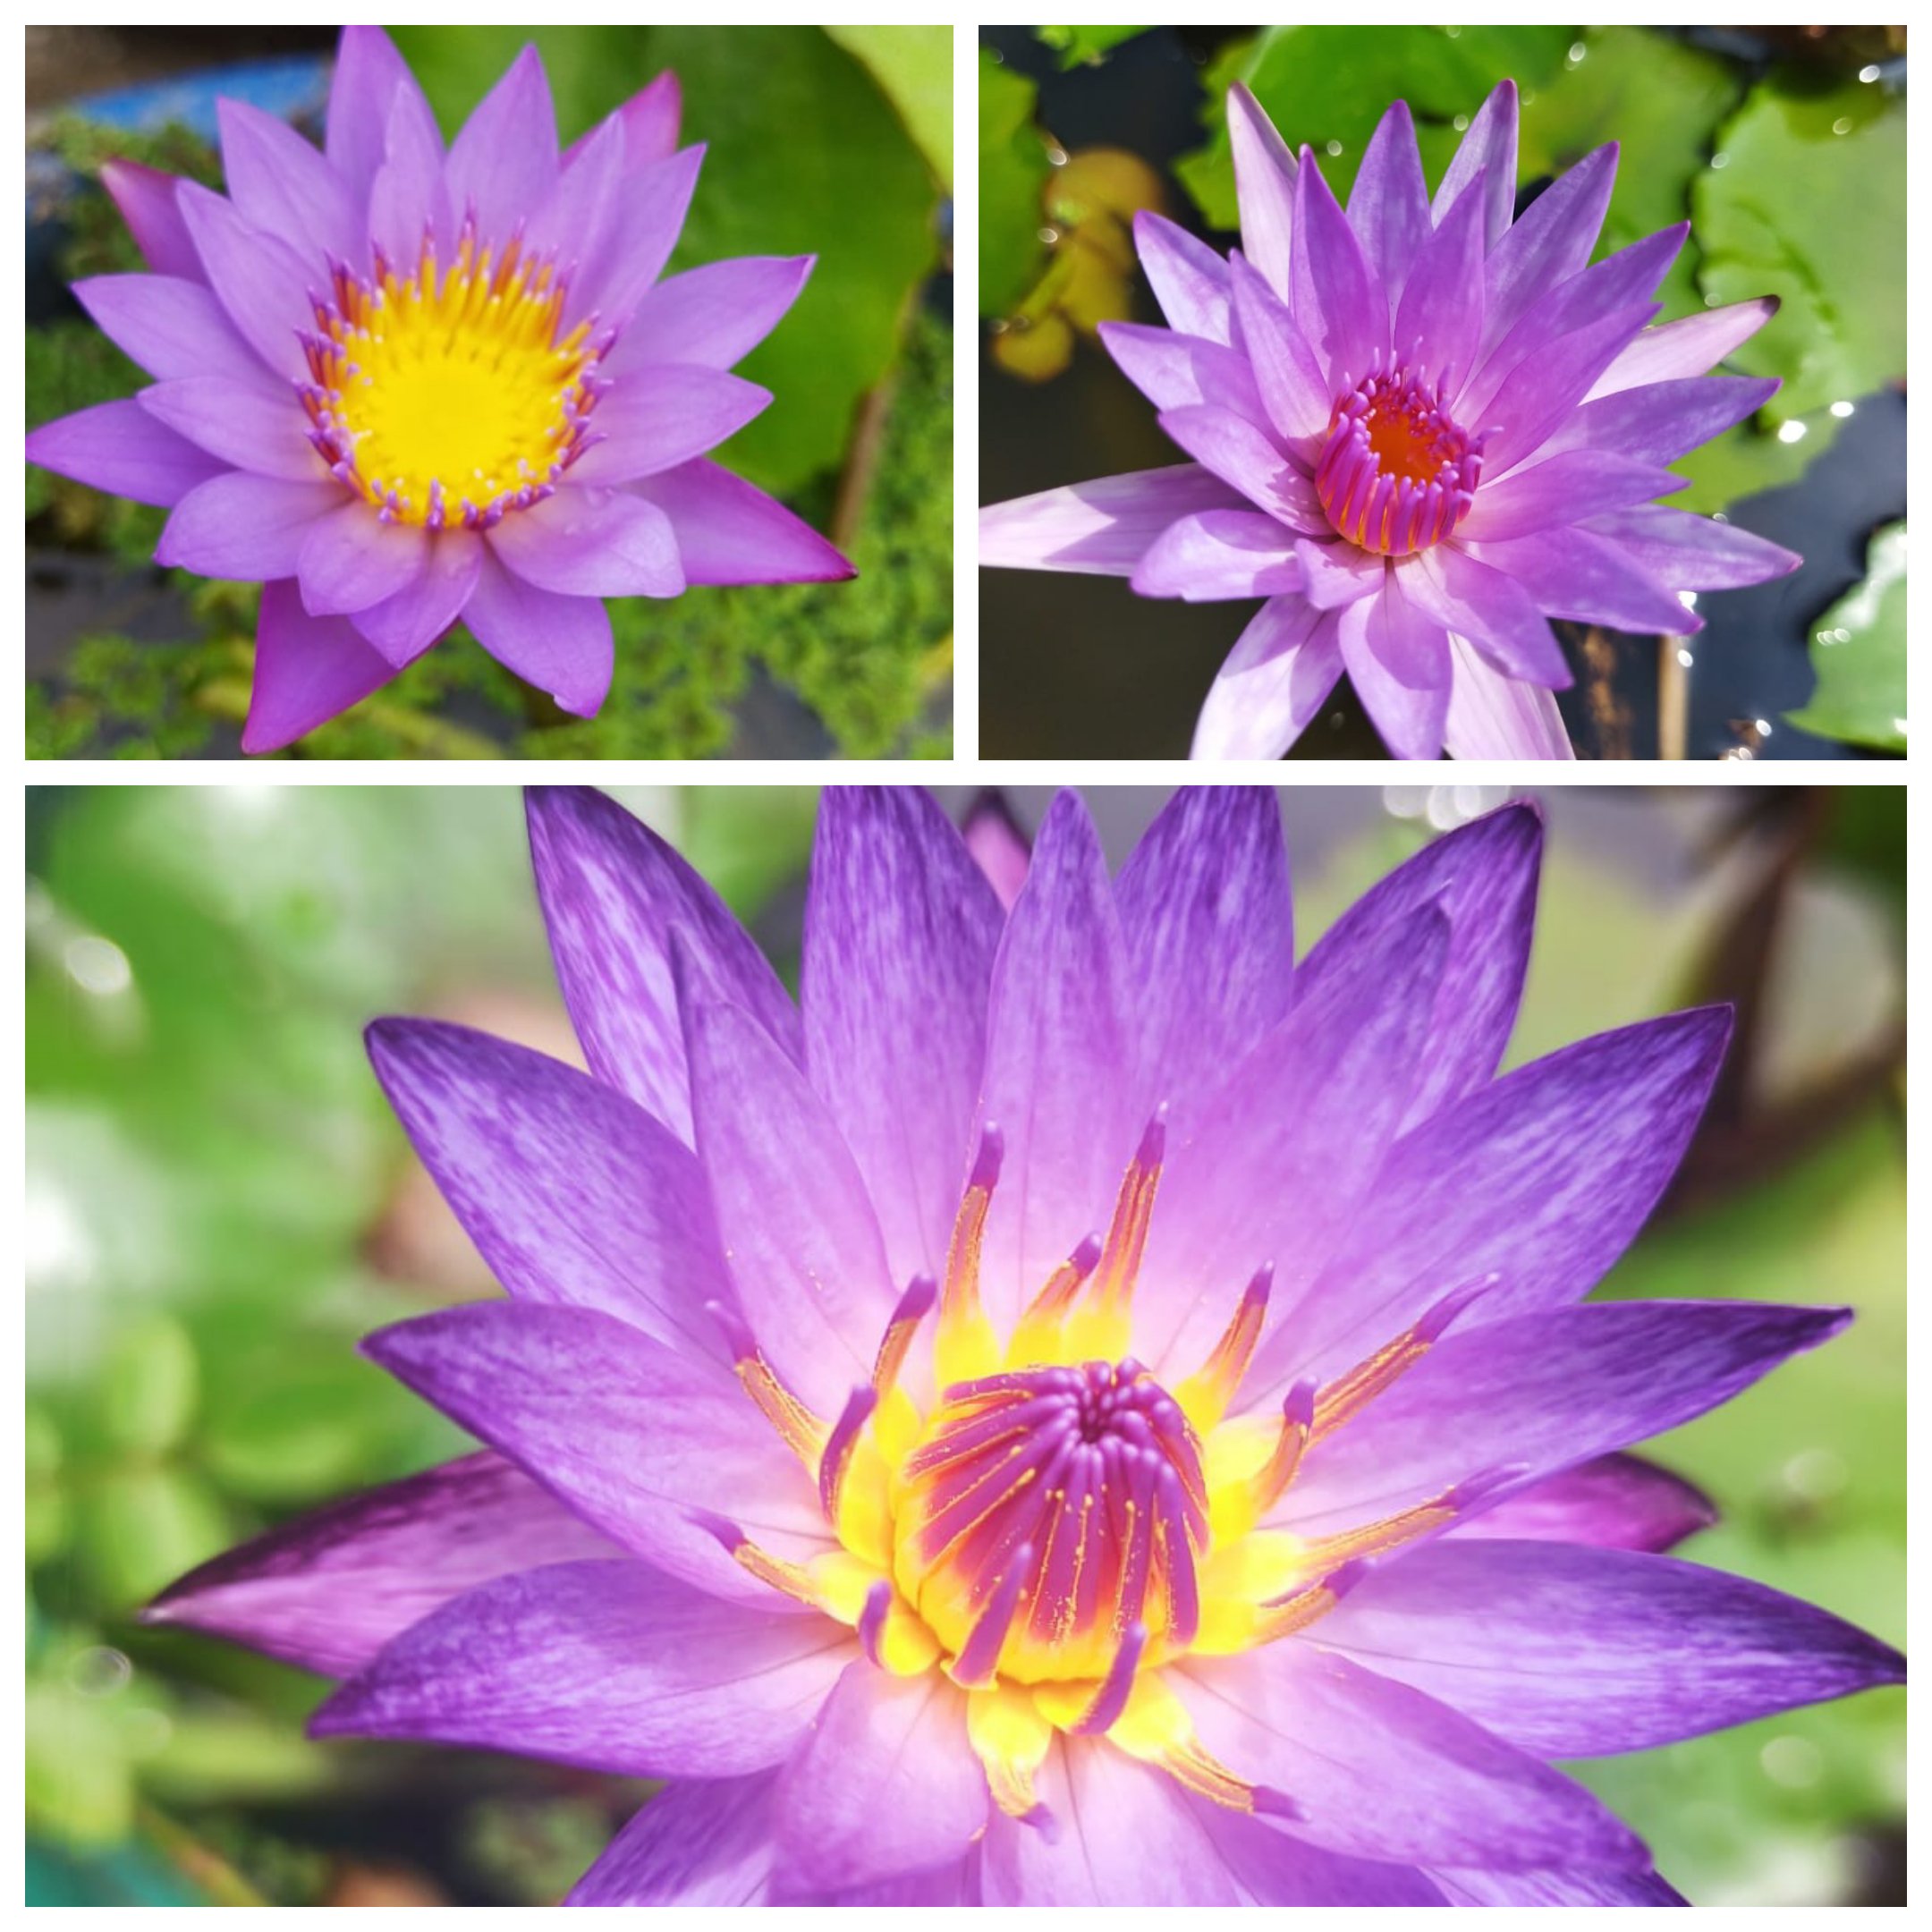 Water lily begginers combo (3 plants)